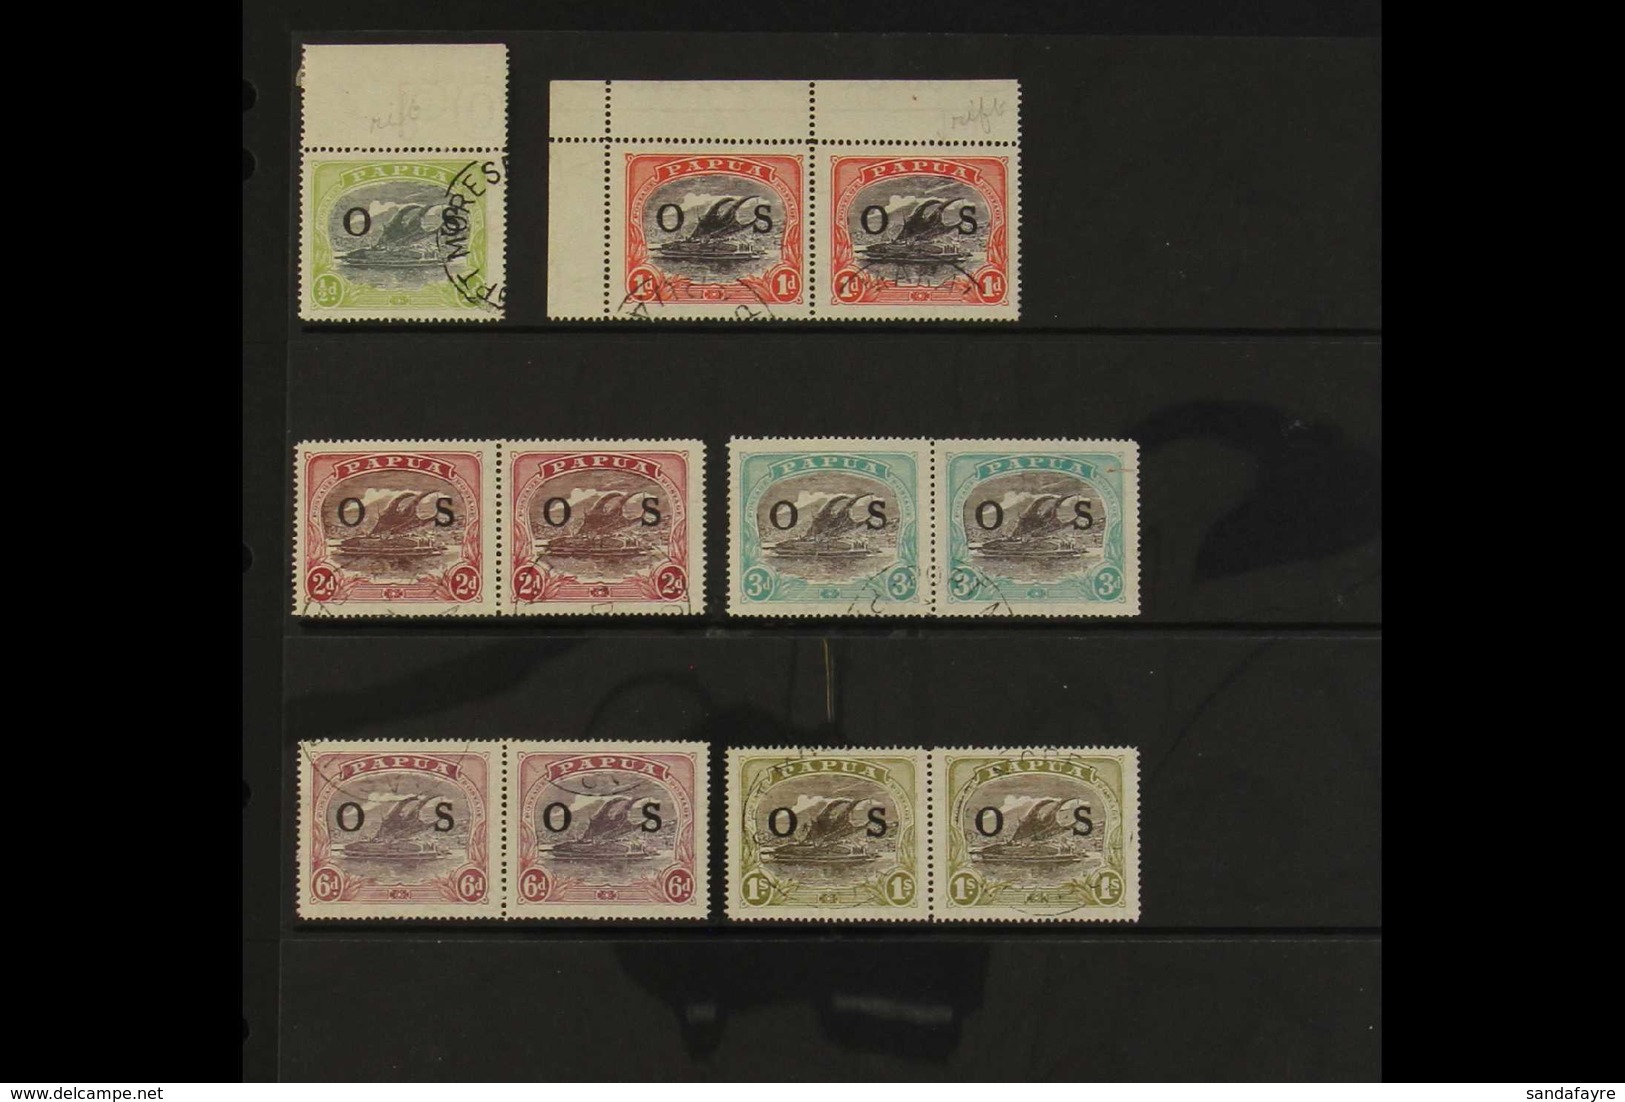 OFFICIALS WITH "RIFT IN CLOUD" FLAW 1931-32 "O S" Overprinted Fine Used Range Of The Variety With ½d Single Upper Margin - Papouasie-Nouvelle-Guinée